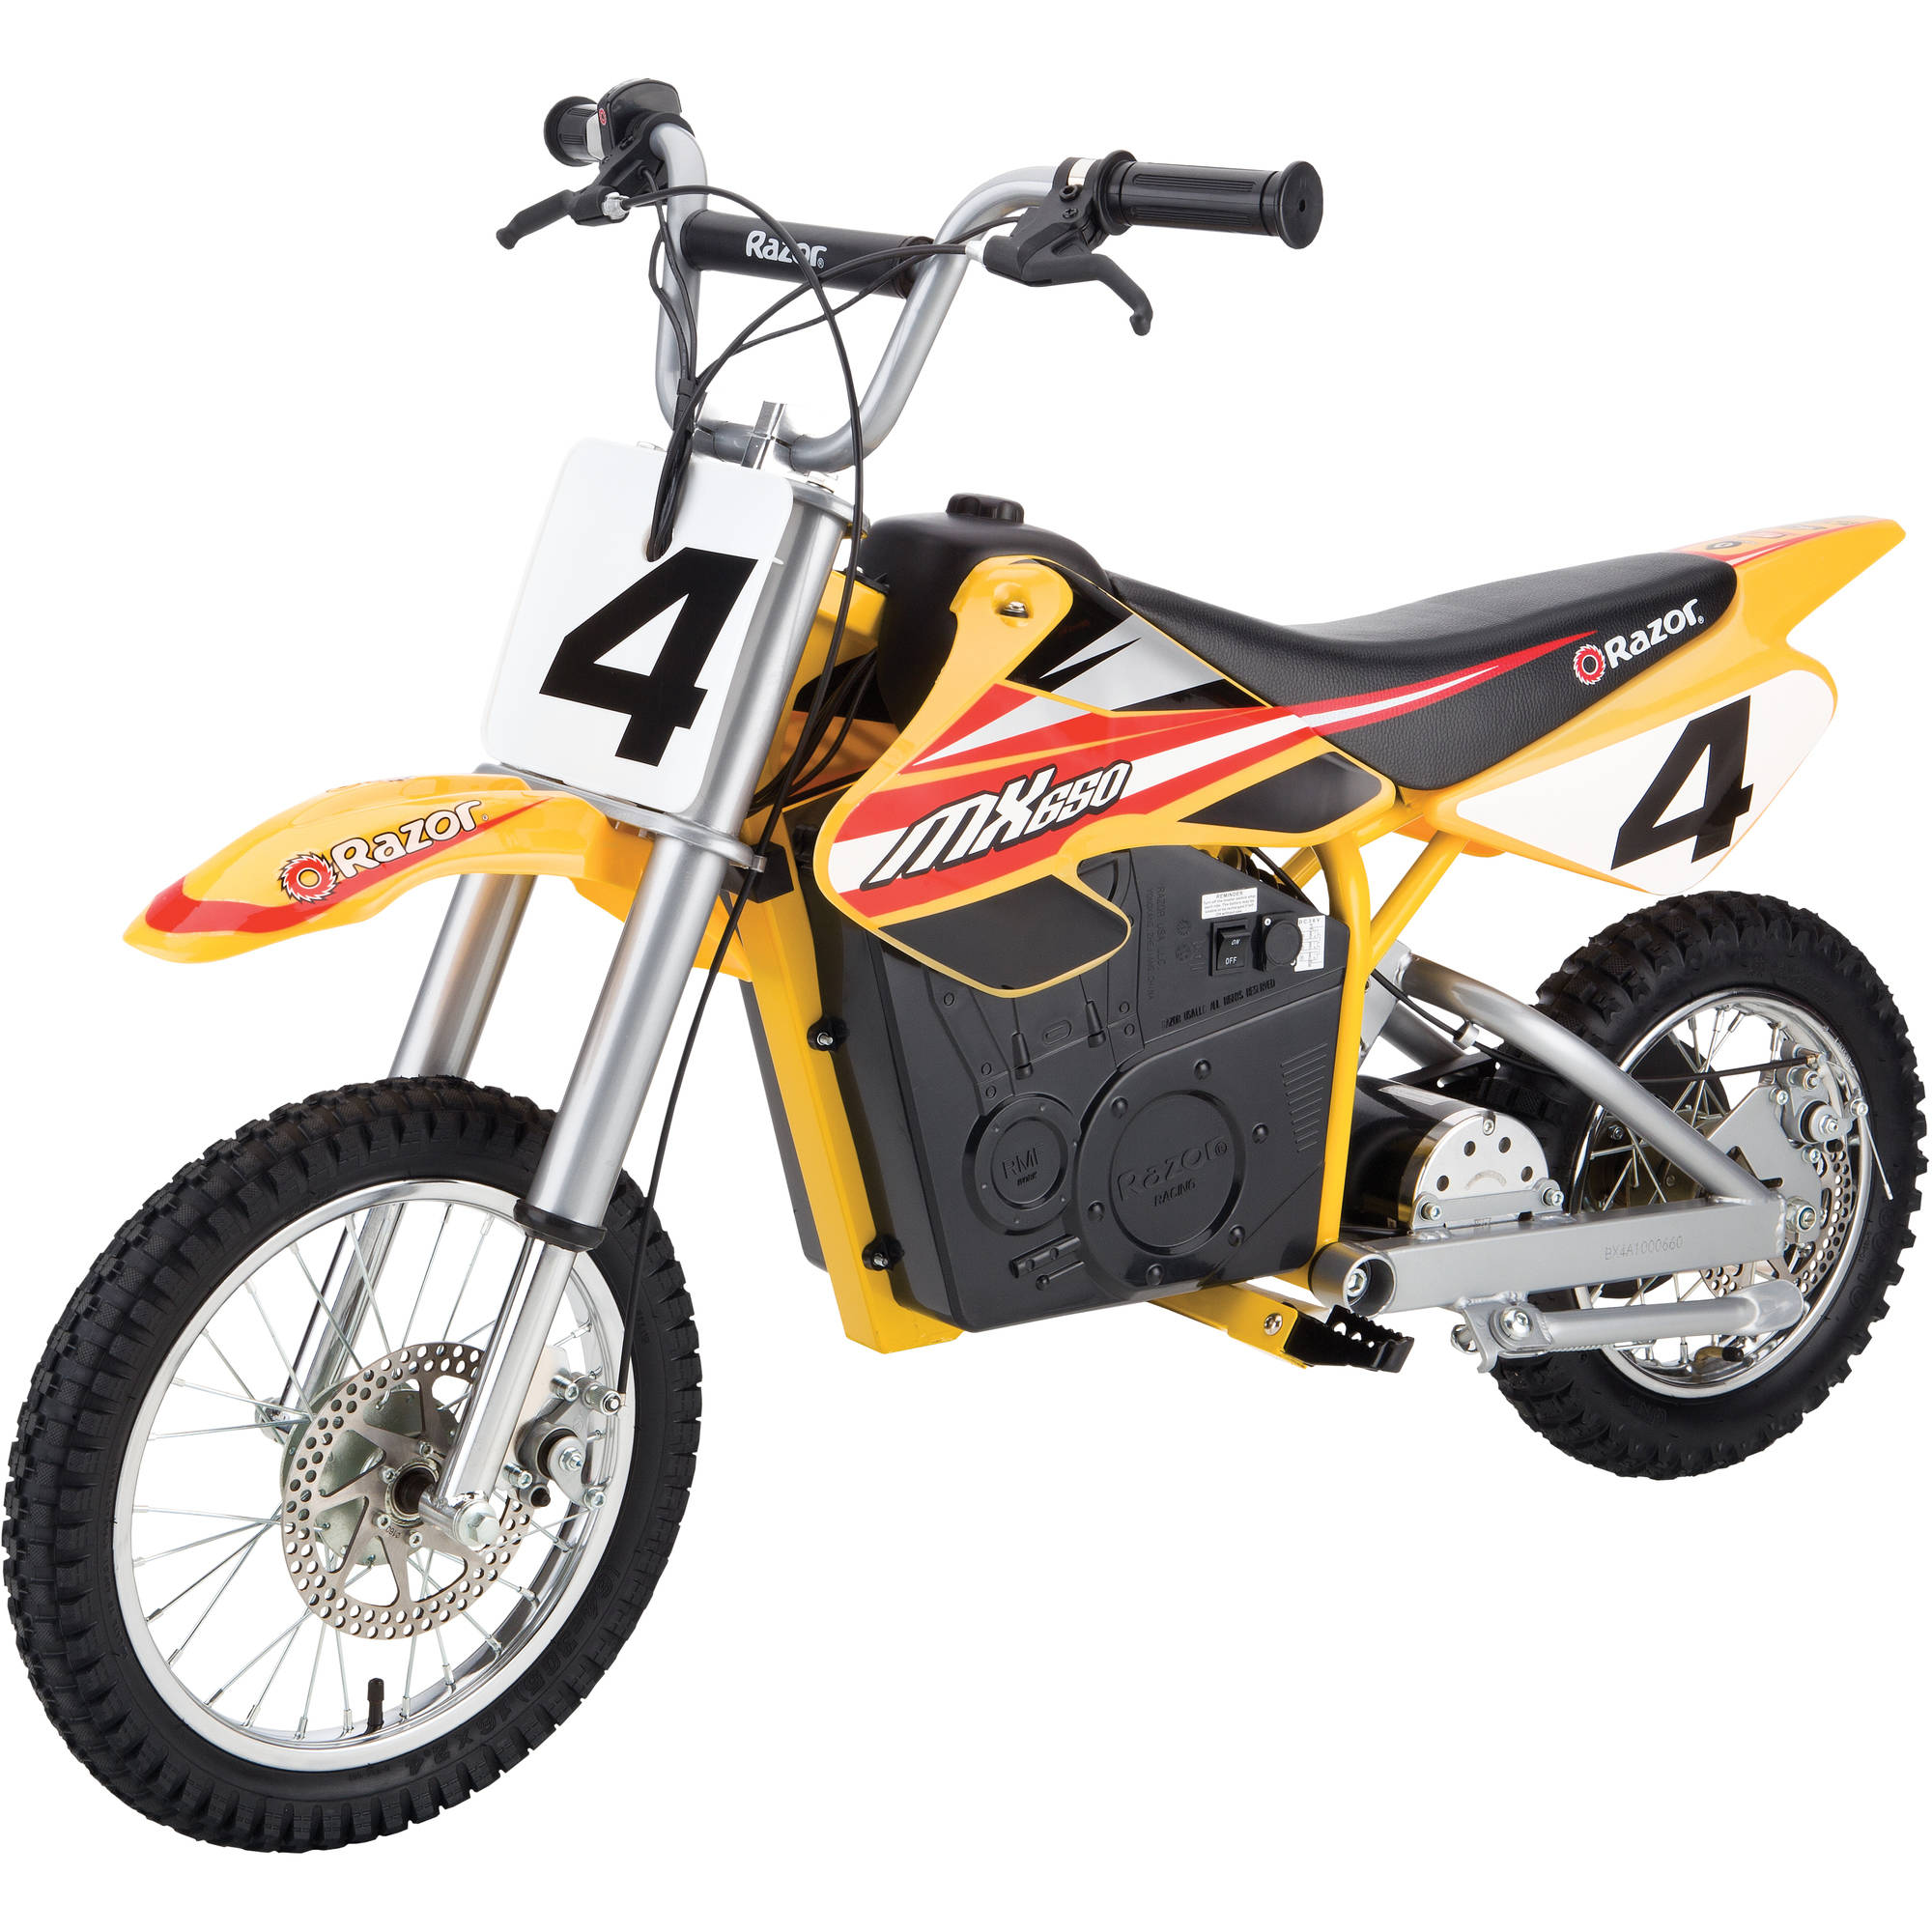 Razor Dirt Rocket MX650 - 36V Electric-Powered Dirt Bike, Ride-On for Teens & Adults - image 1 of 11